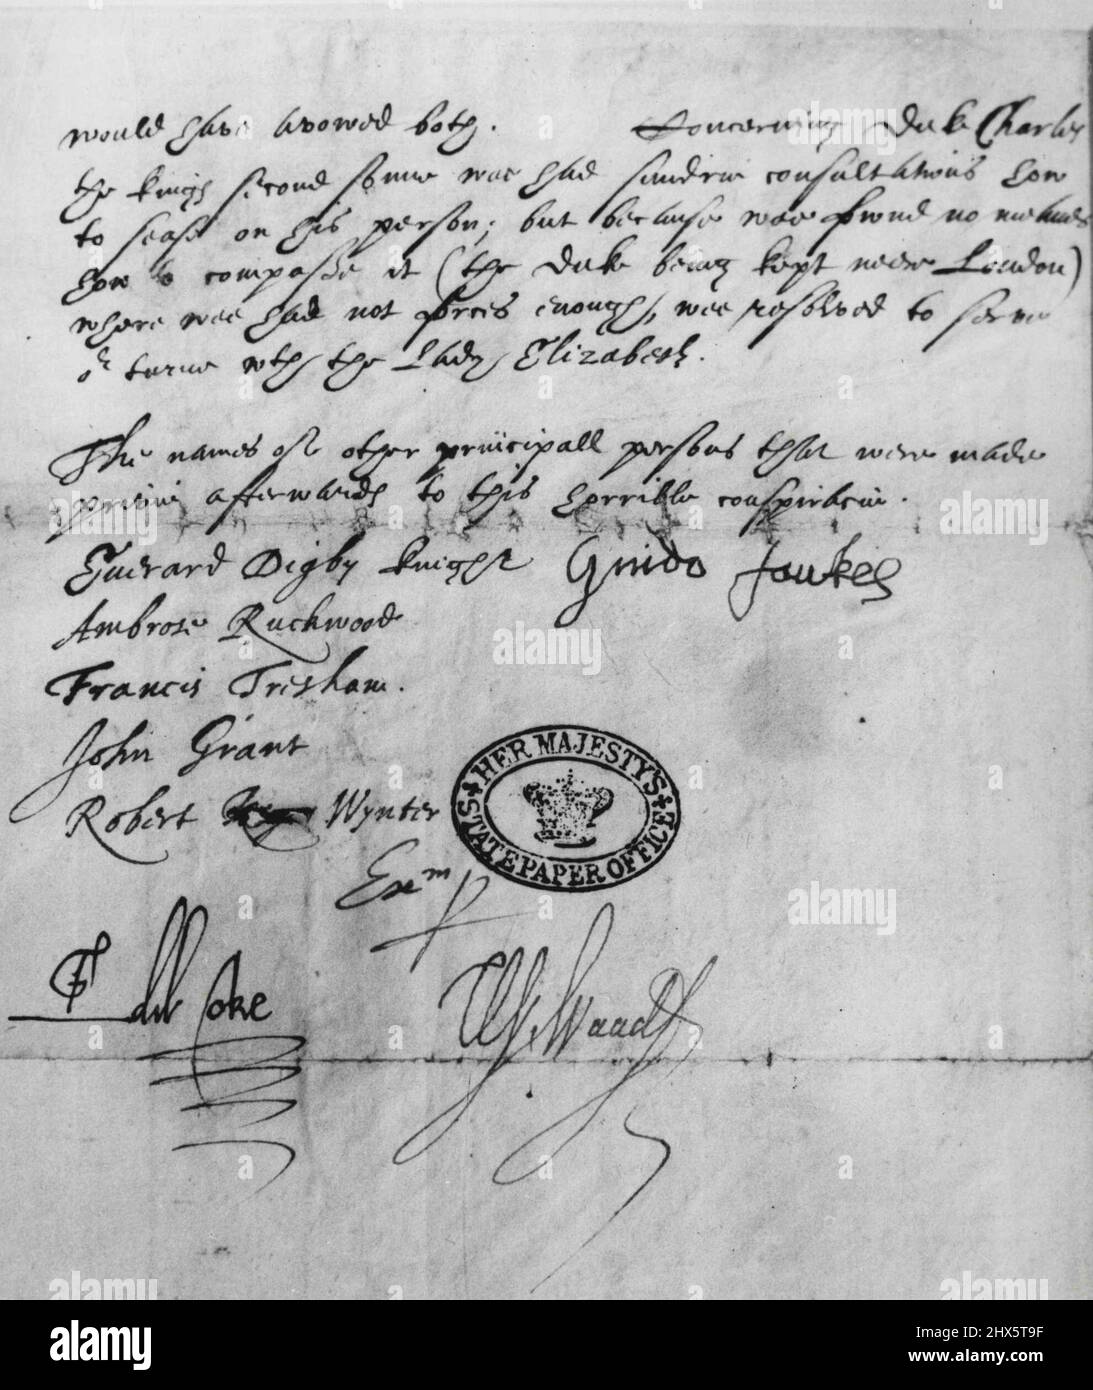 Illegible But Valuable-- Several centuries later, the signature of Guy Fawkes attests to the treatment he went through after the discovery of the 'Gunpowder Plot' in 1606. Above it is a statement in which Fawkes admitted his part in the plot to blow up the Parliament, Following the discovery of the conspiracy. The signature is believed to have been affixed after torture, reads the label. April 15, 1947. (Photo by Wide World Photos). Stock Photo